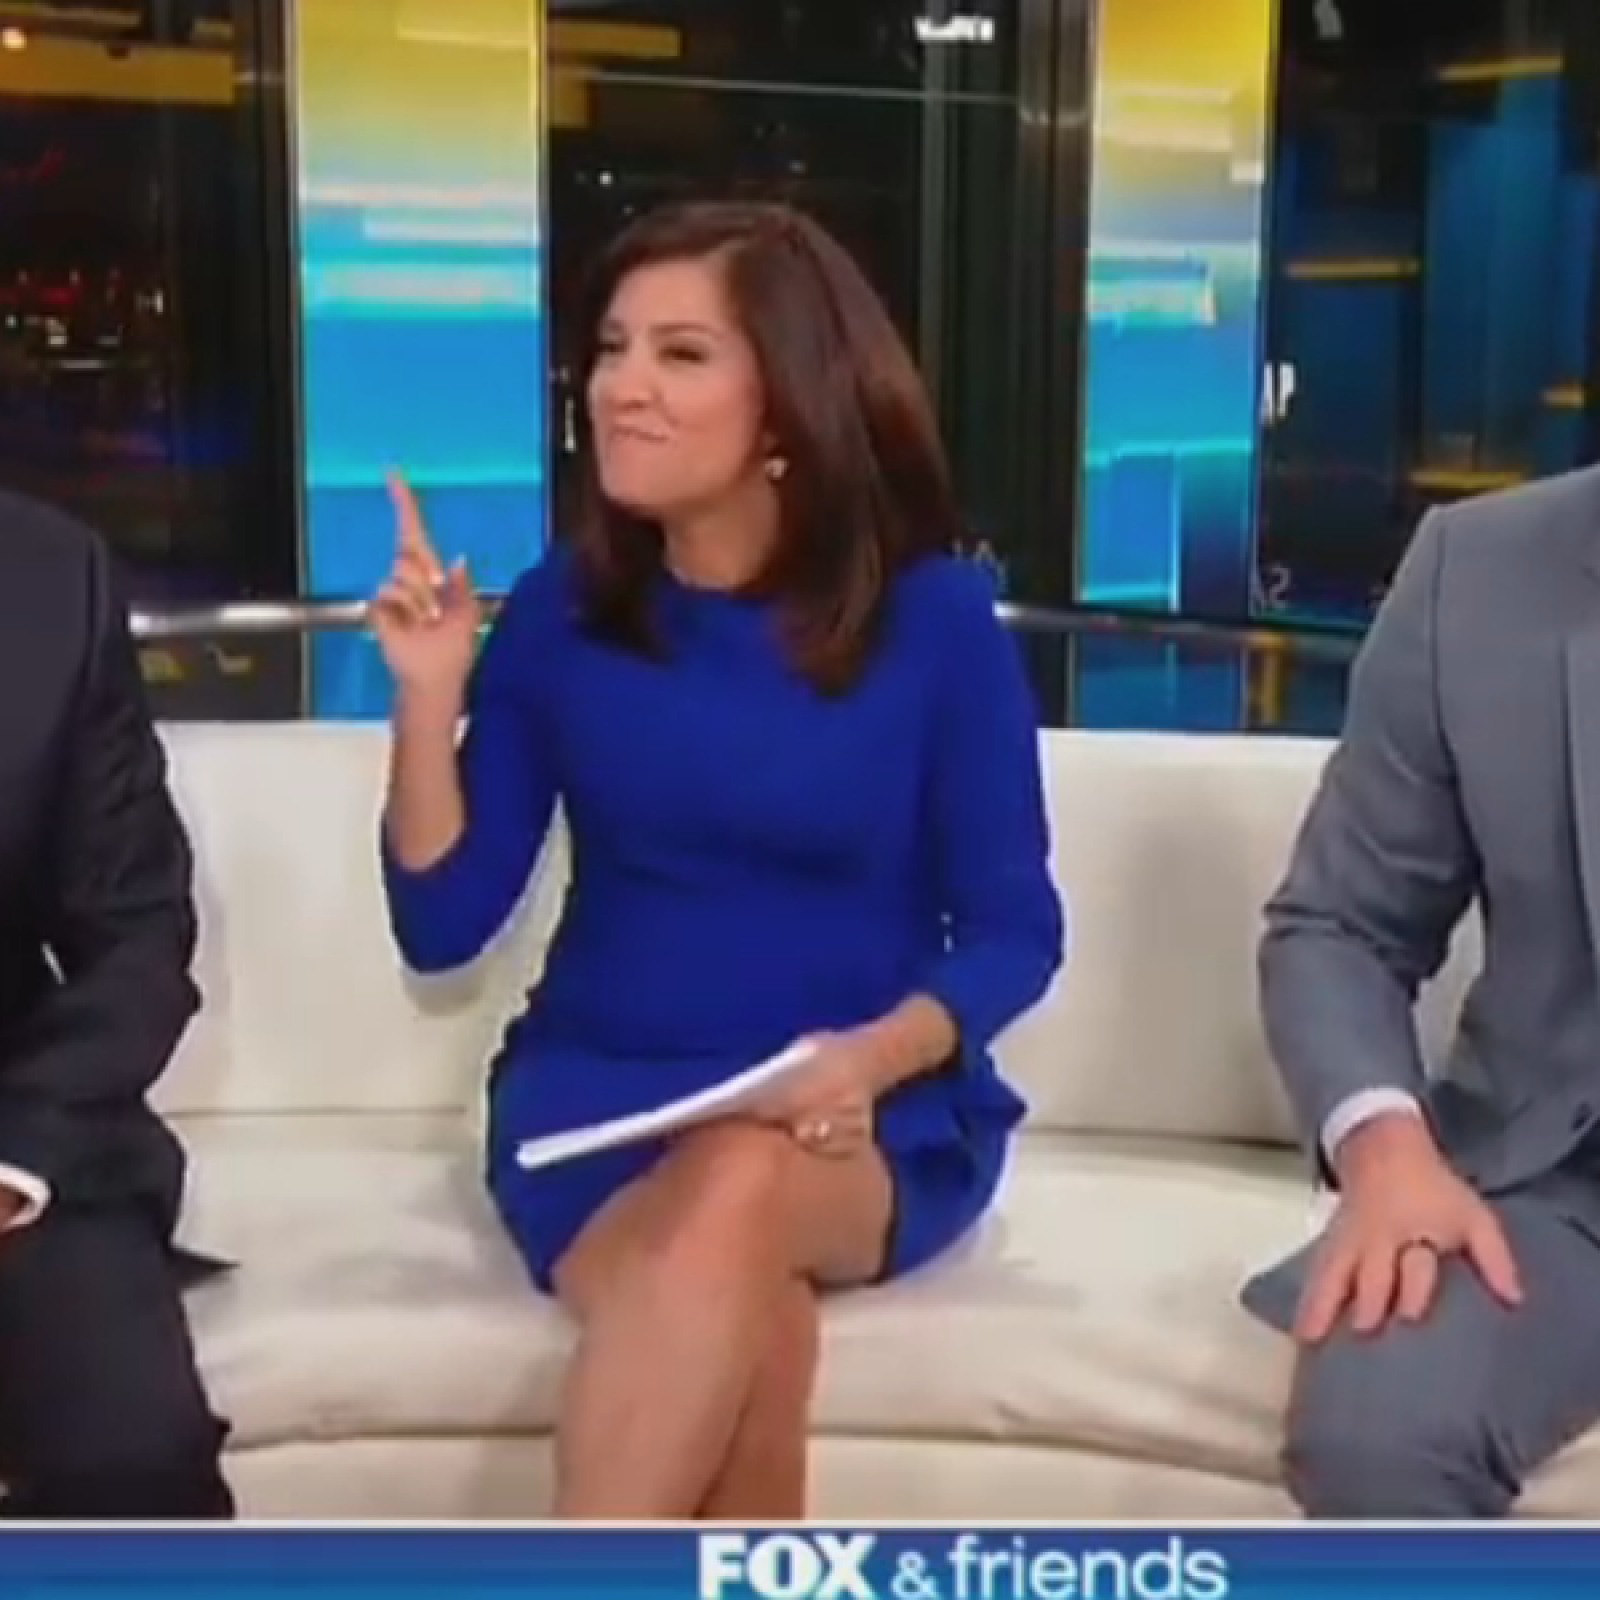 Fox News Host Joked That 'Toxic Masculinity' Helps Keep America Free, Boasted About Size of US Flag